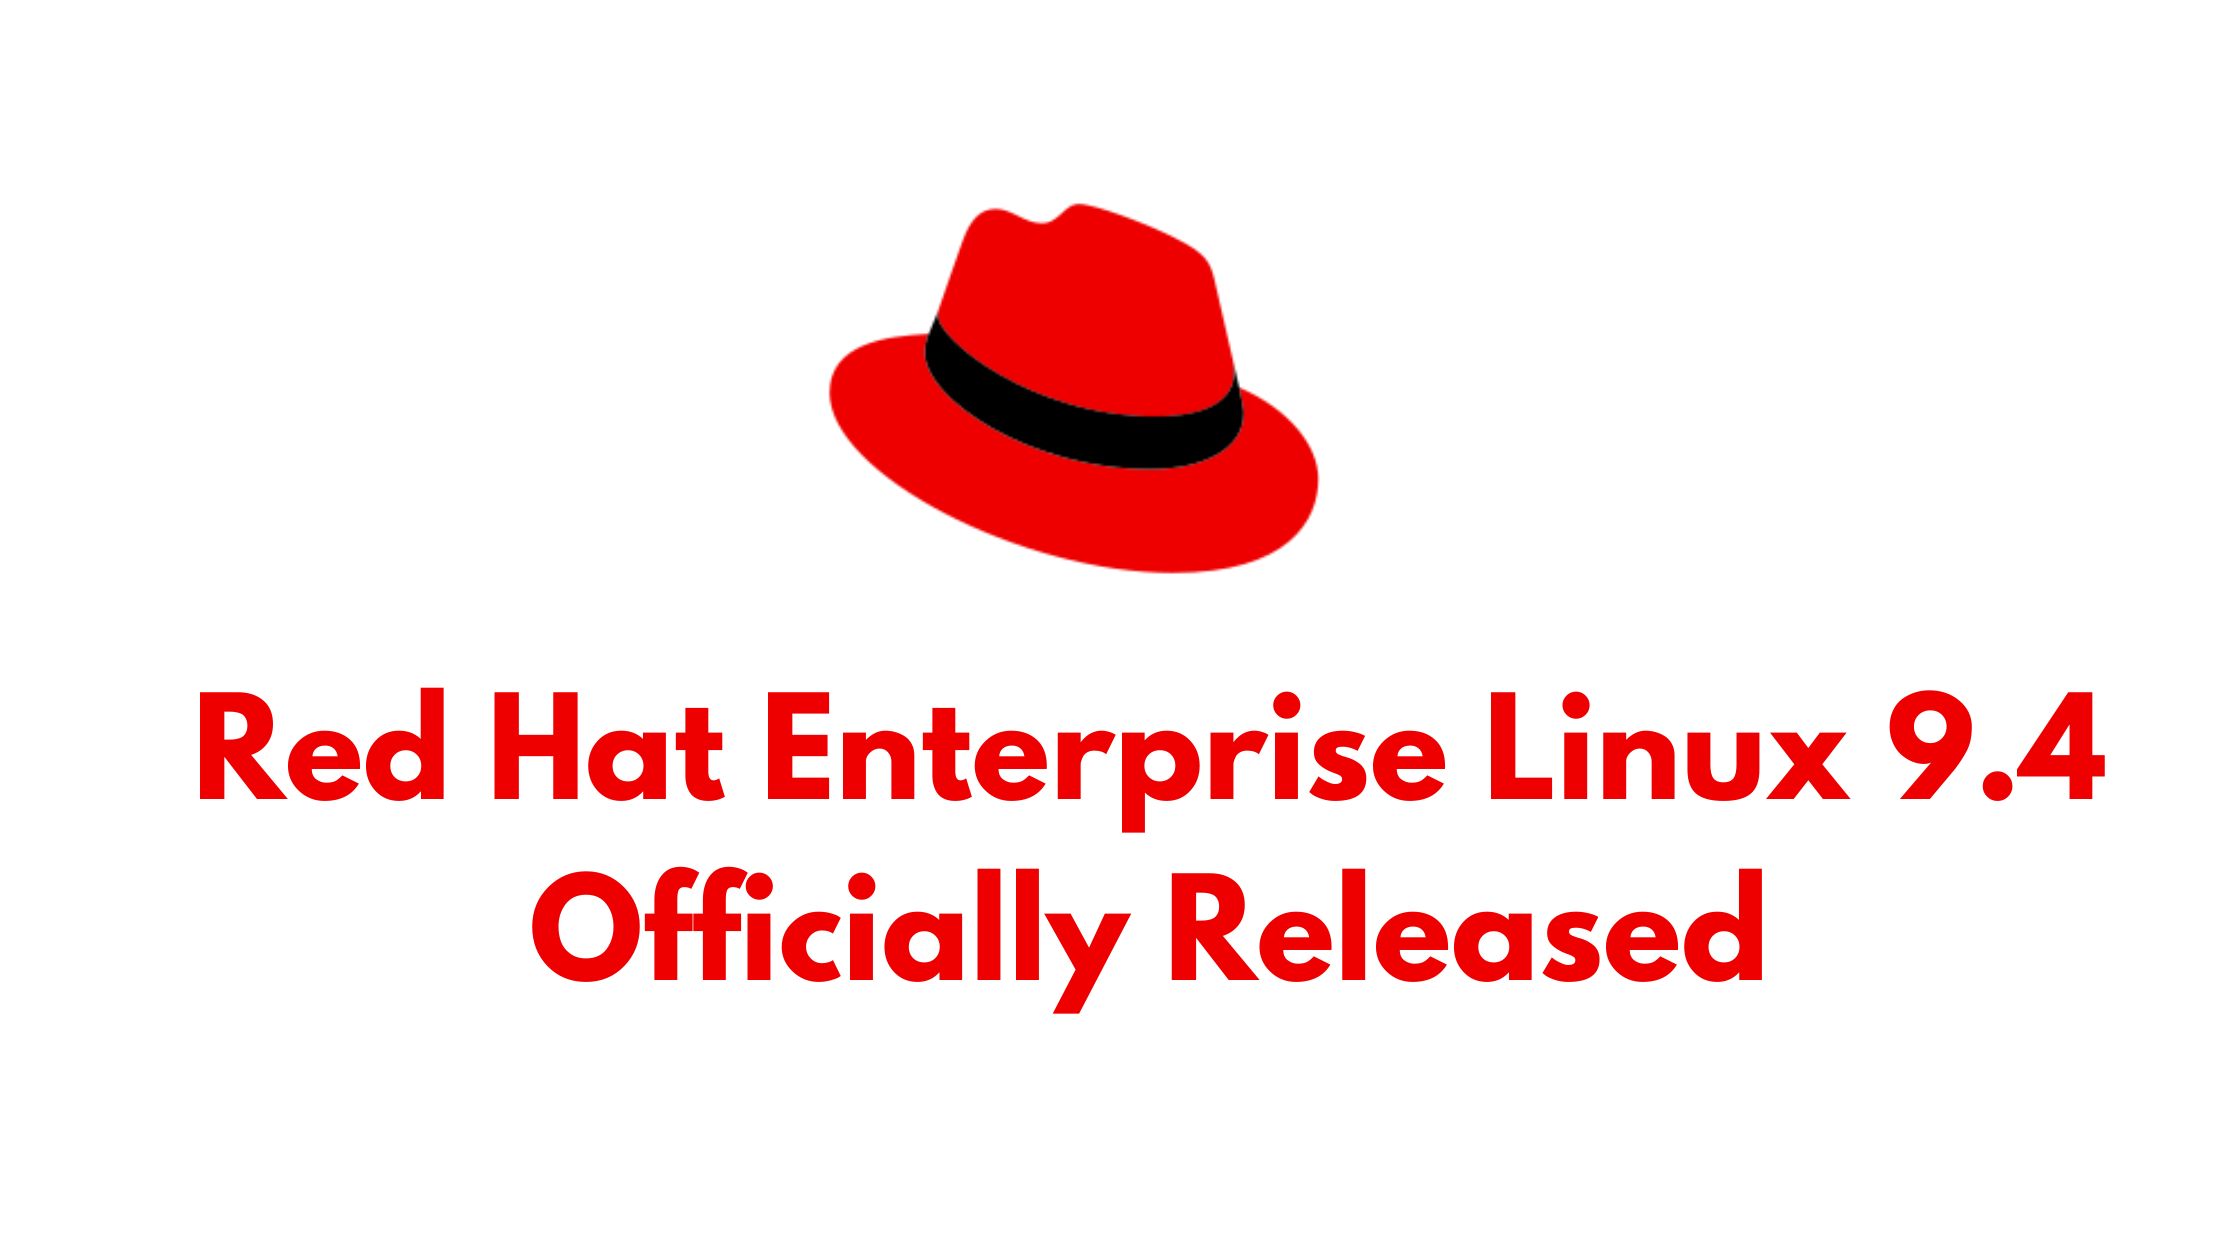 https://www.redhat.com/en/about/press-releases/red-hat-simplifies-standard-operating-environments-across-hybrid-cloud-latest-version-red-hat-enterprise-linux